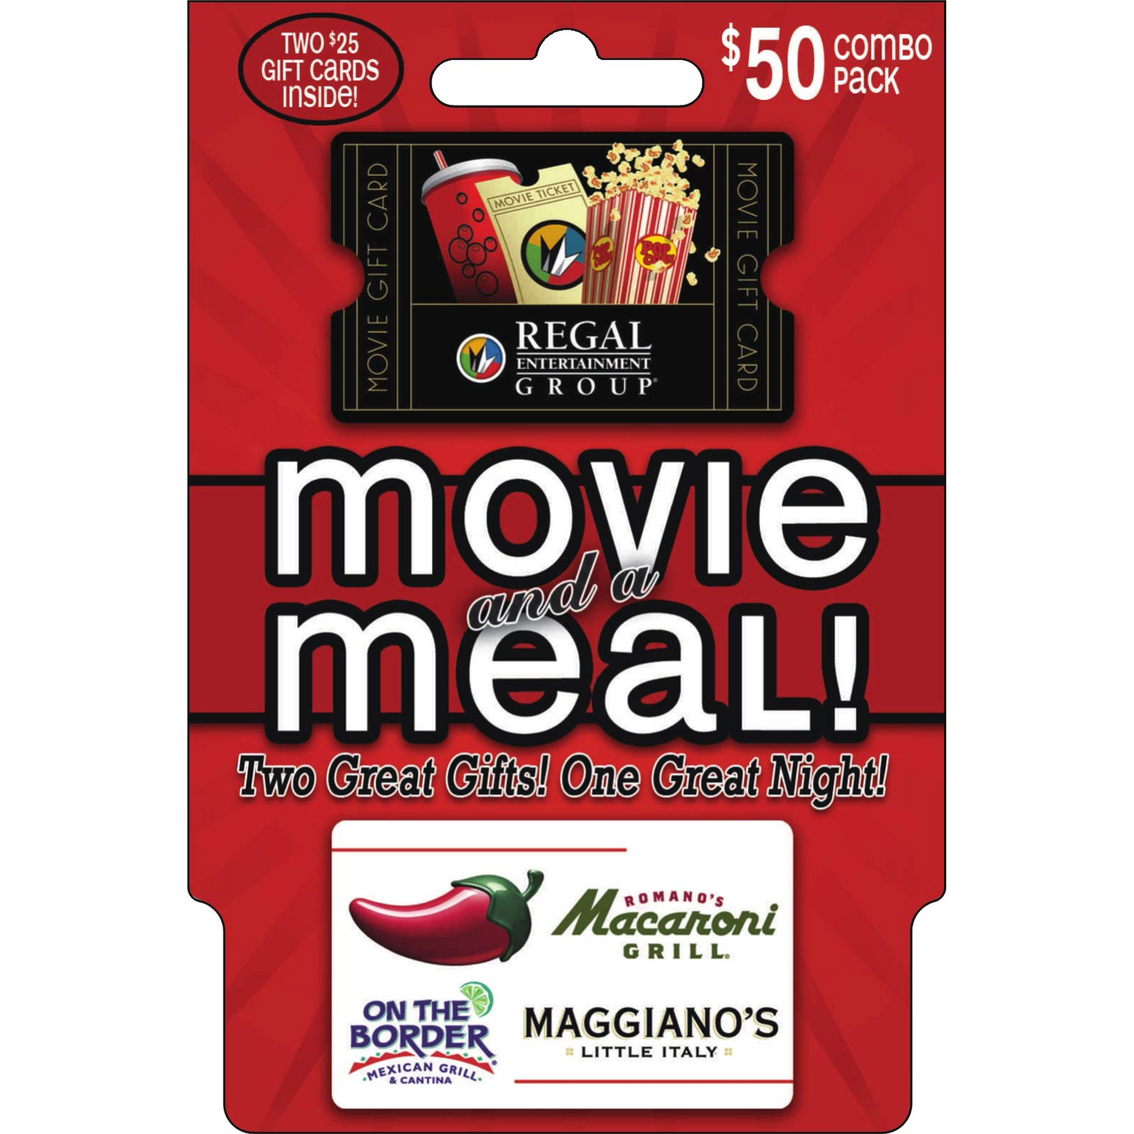 Brinker Regal And A Meal Gift Card Combo Pack Entertainment Dining Gifts Food The Exchange